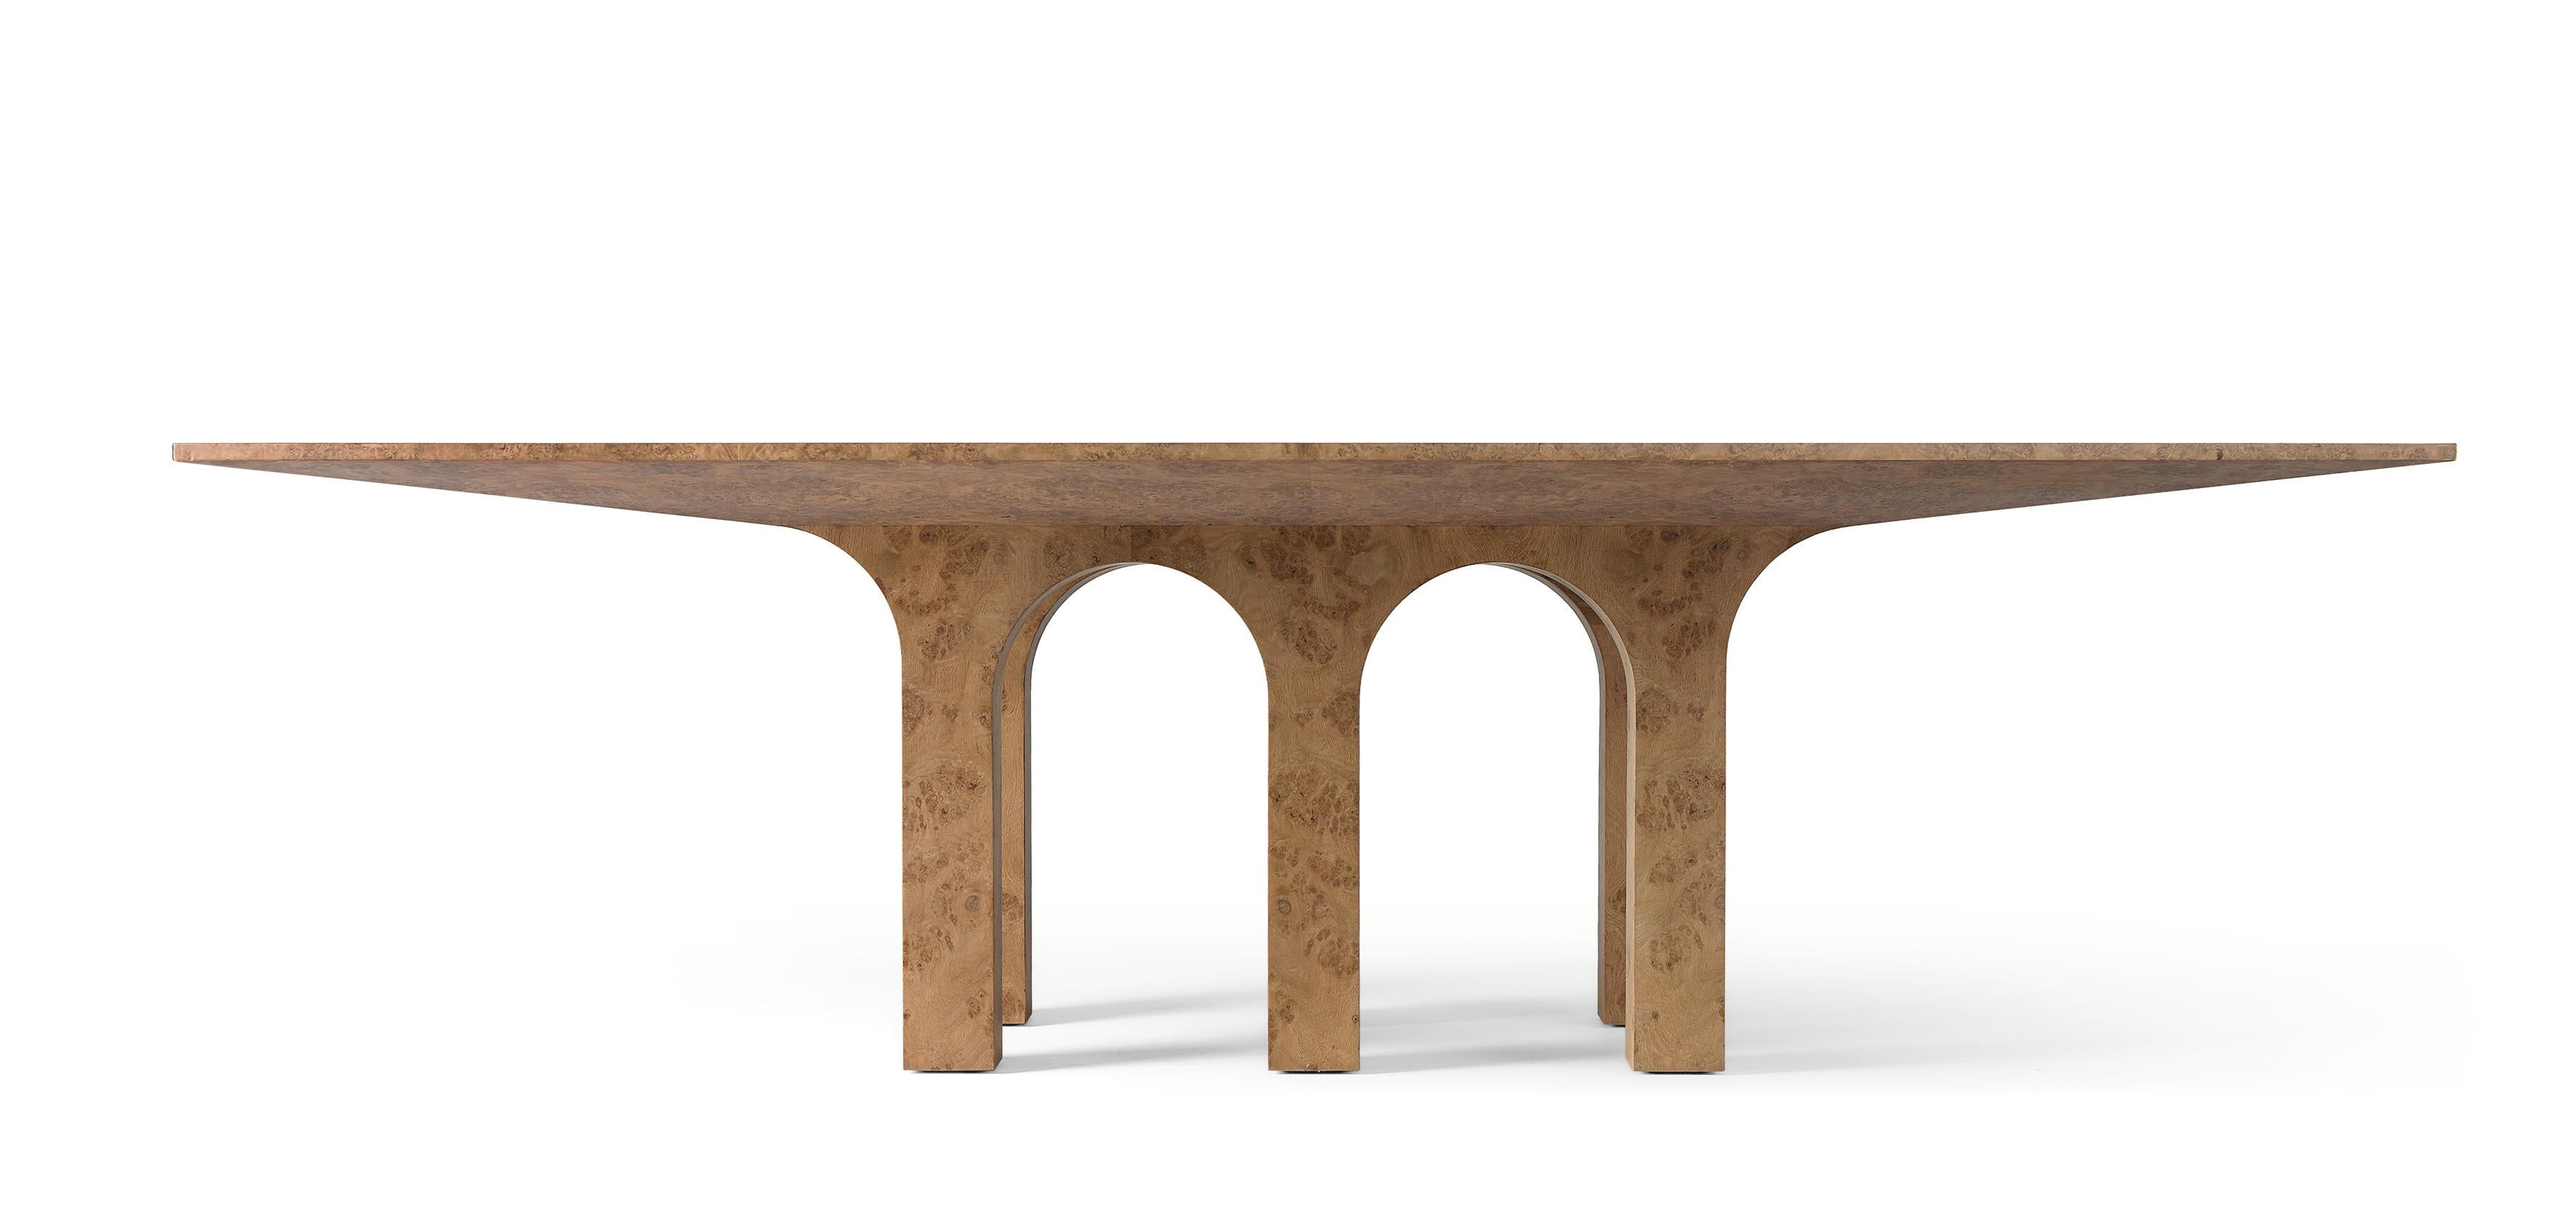 This table is a monumental piece covered entirely in inlaid oak root, born from the fusion of classic architectural forms of arches and cross vaults and the tradition of noble cabinetmaking workmanship.
The base is composed of six legs that draw a